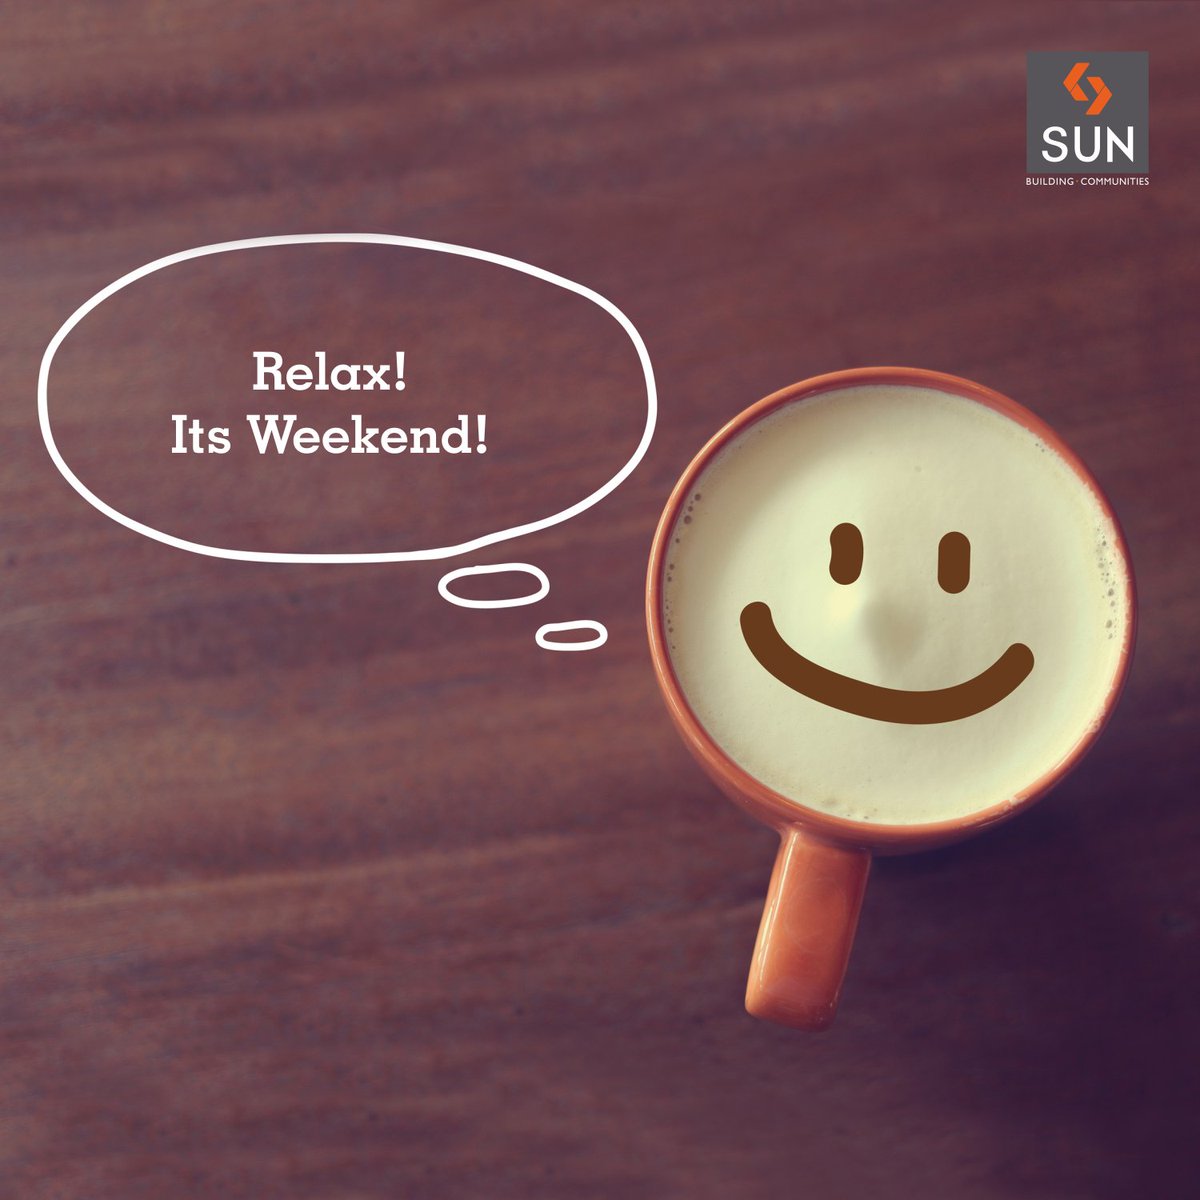 Pause your routine and let out a sigh of relief as the weekend has arrived.
#HappyWeekend to all! https://t.co/sazVpKbjVy